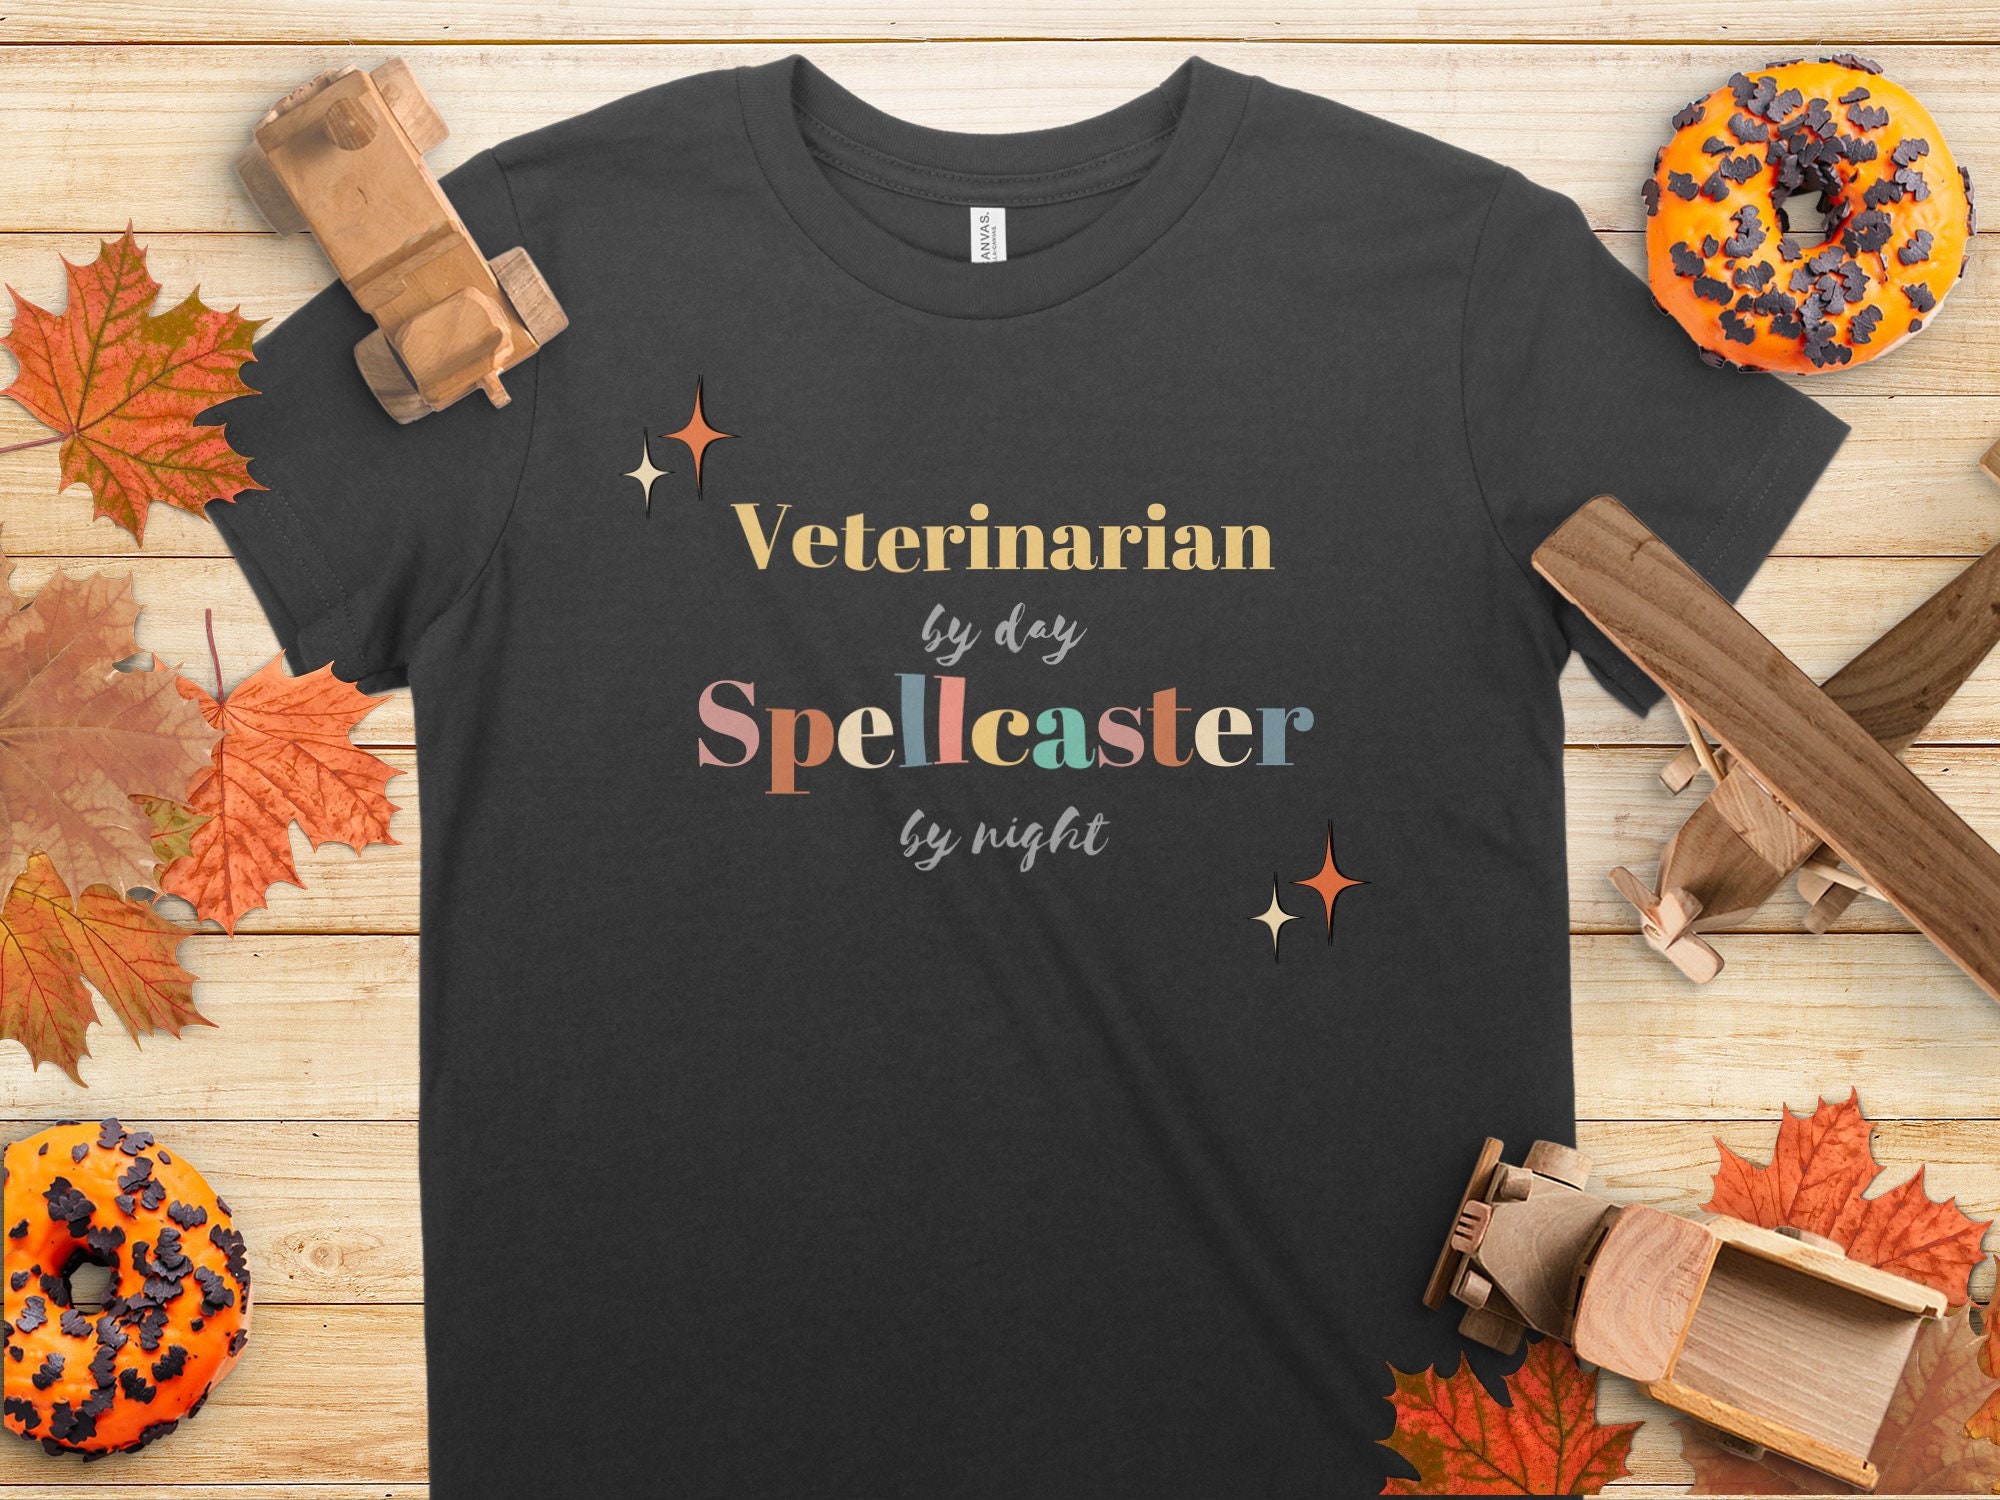 Discover Retro Halloween Veterinarian Shirt, Team Shirts, Veterinarian by day Spellcaster by Night, Halloween Tshirt, Veterinarian Gift, Customized